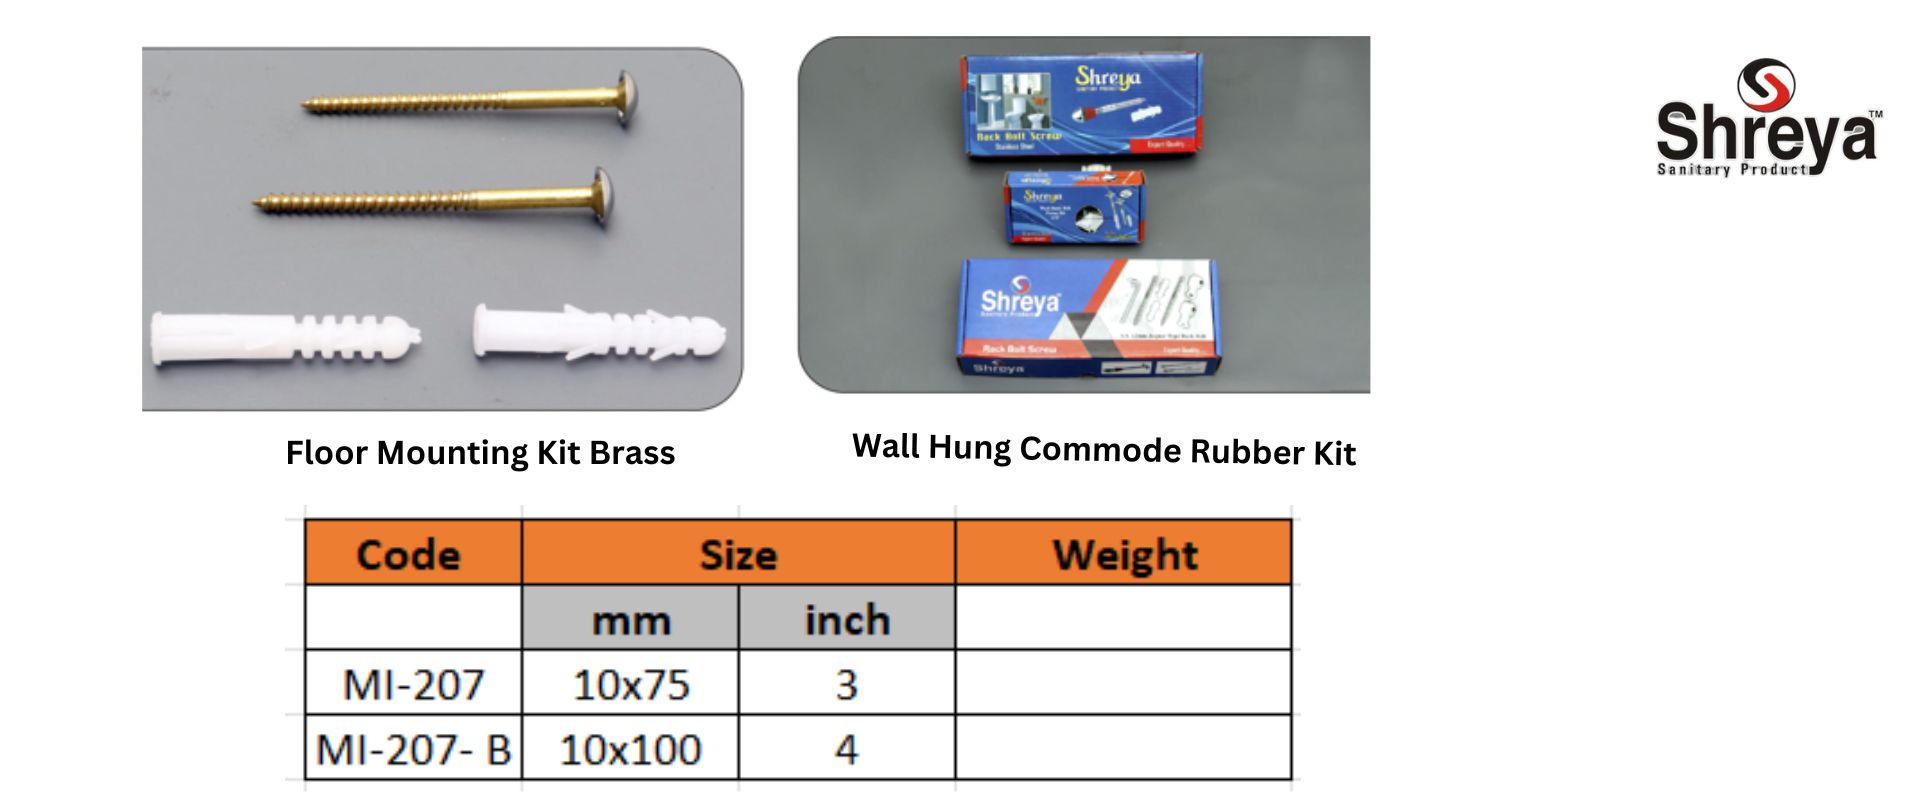 Wall Hung Commonde Rubber Kit